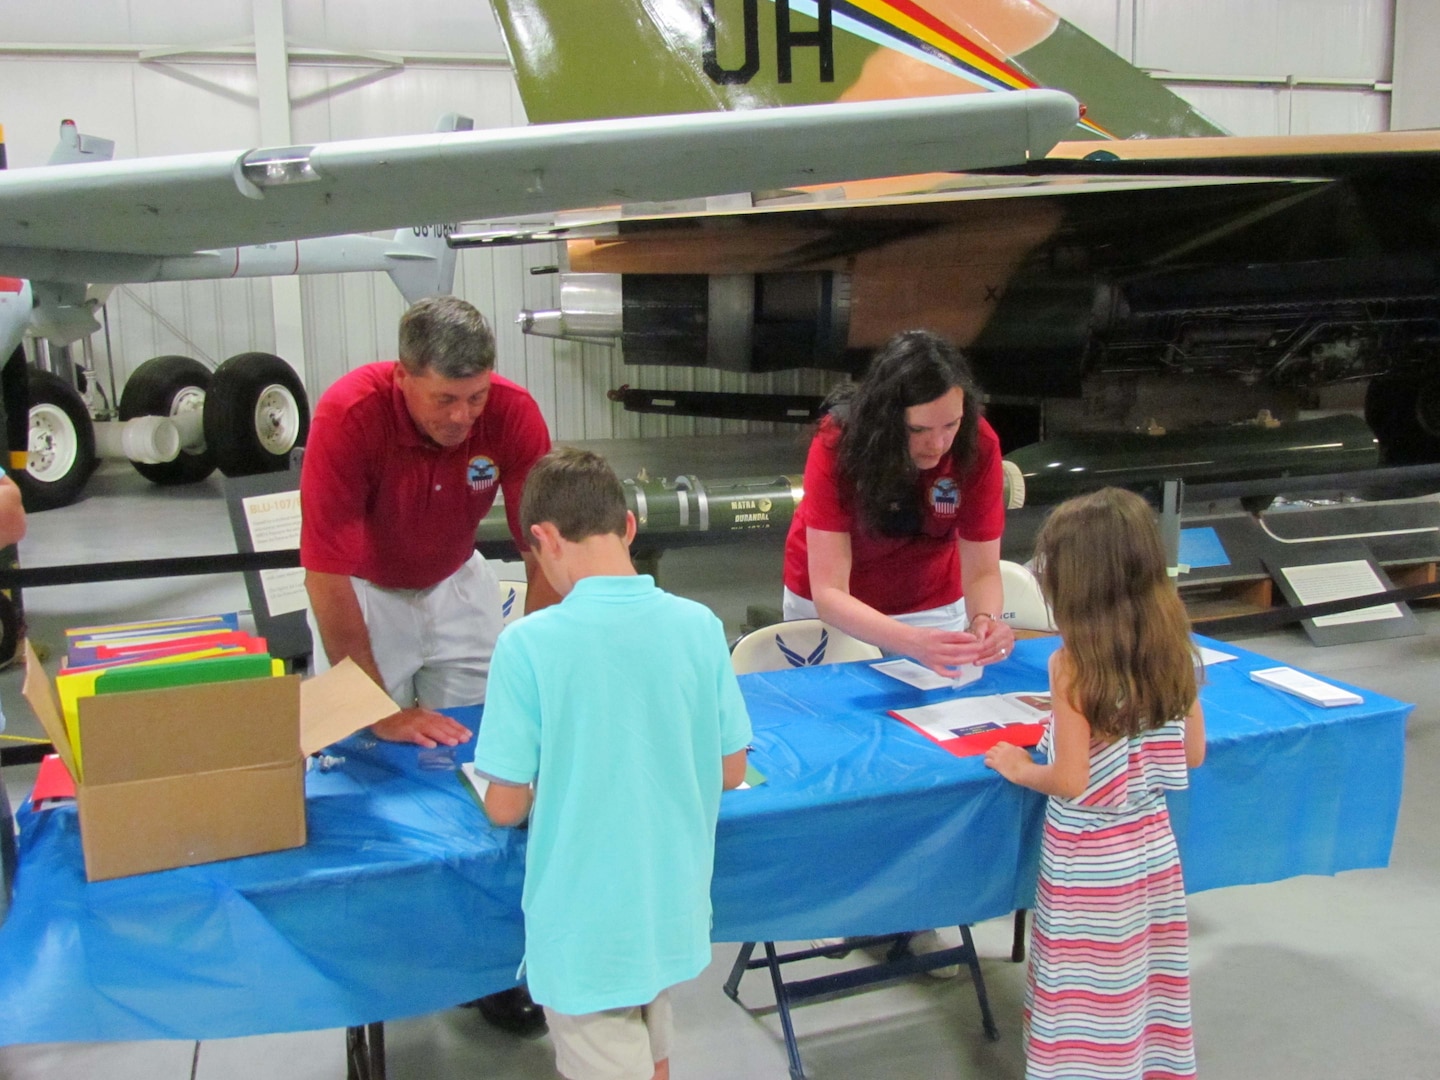 Defense Logistics Agency Aviation at Ogden, Utah, employees Scott Wilson and Kelly Scott greet children and provide them with welcome packets during the organization’s “Bring Your Child to Work Day” June 9, 2016, at the Hill Aerospace Museum on Hill Air Force Base. 